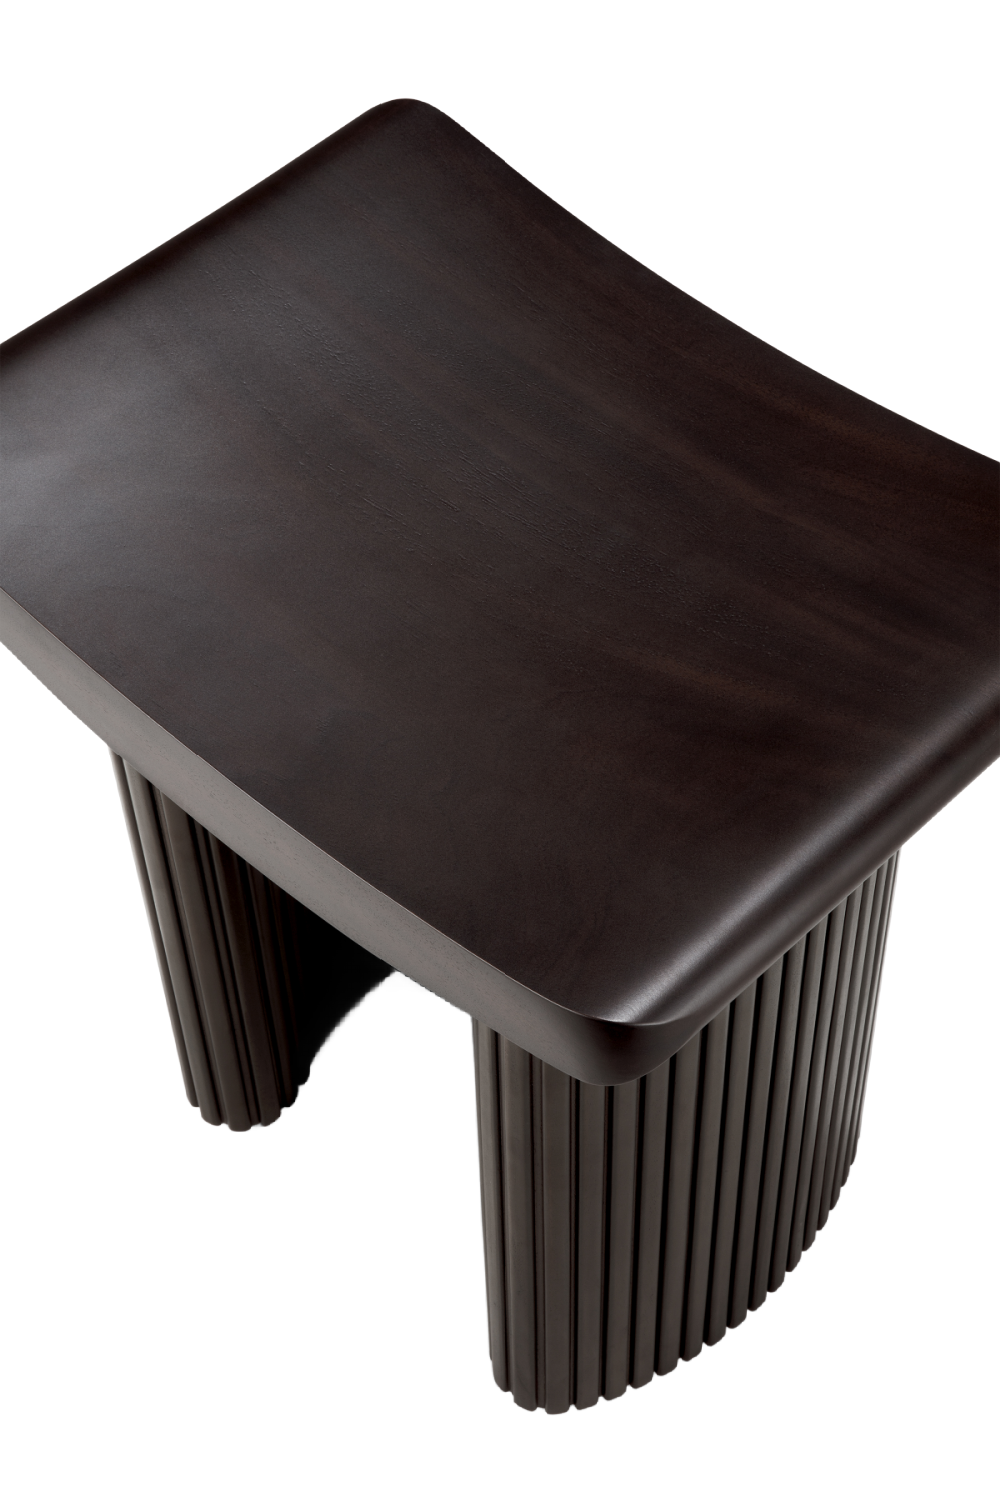 Brown Mahogany Curved Stool | Ethnicraft Roller Max | Oroa.com